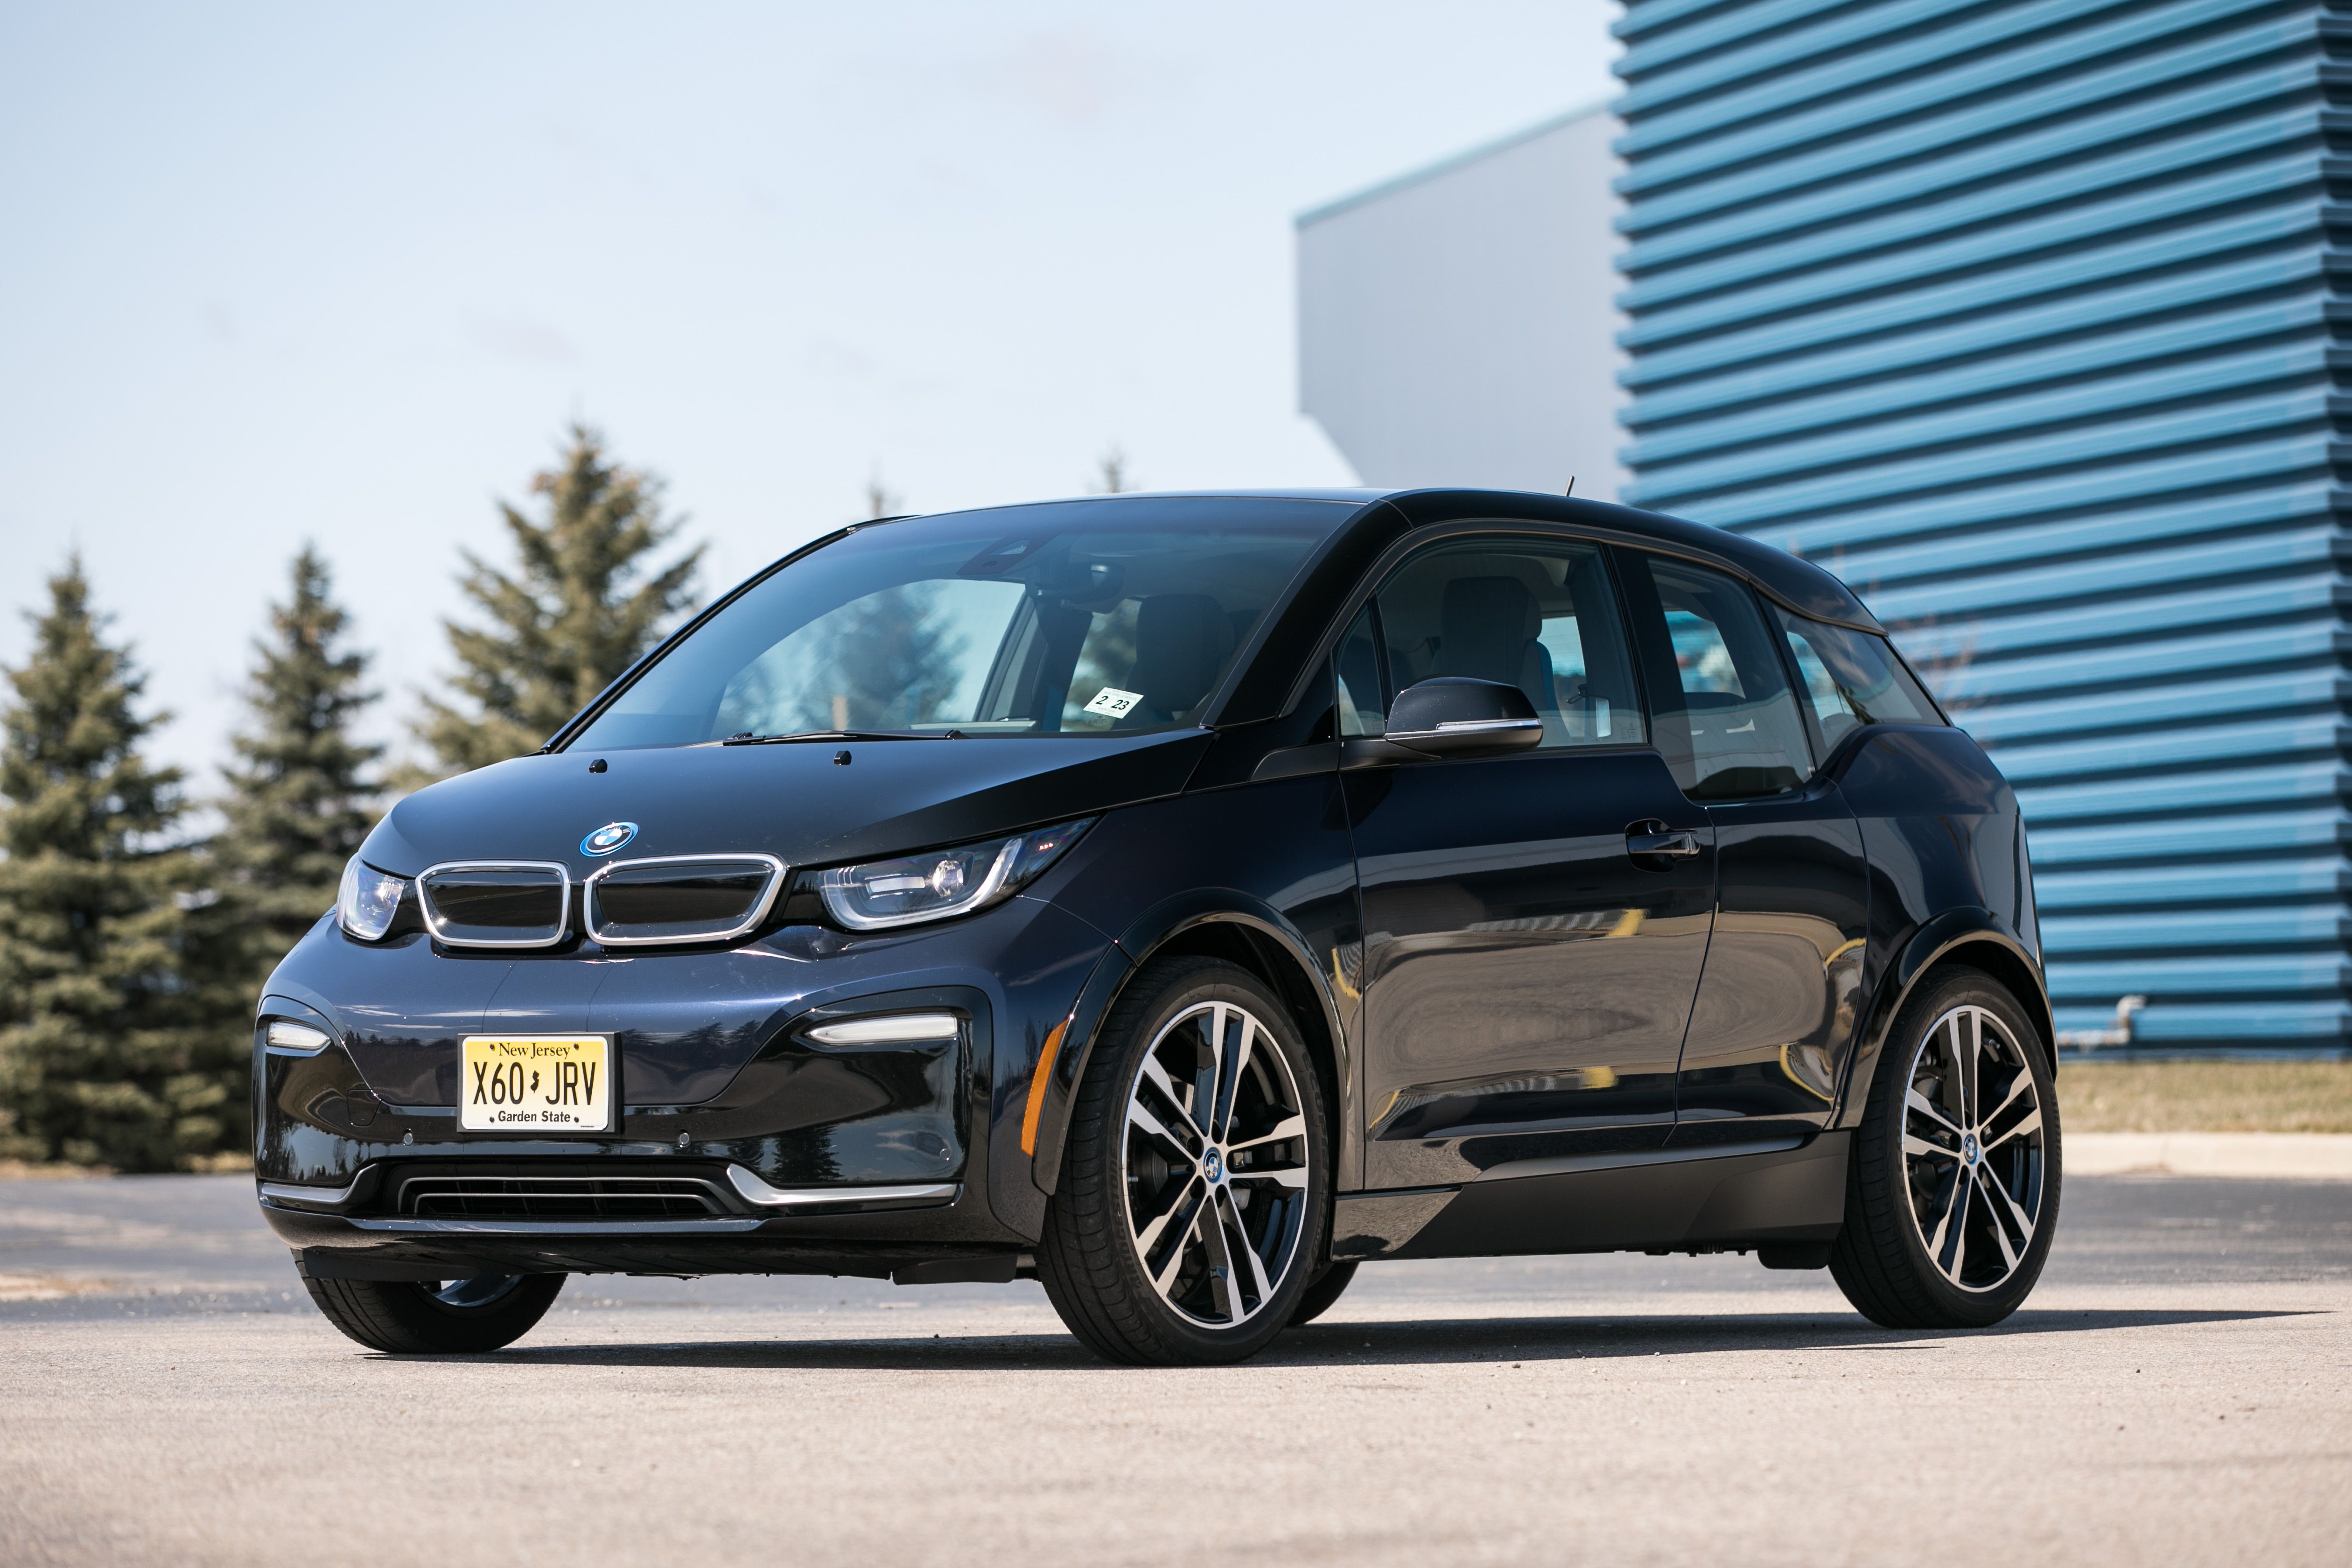 2019 BMW i3 Review, Pricing, and Specs